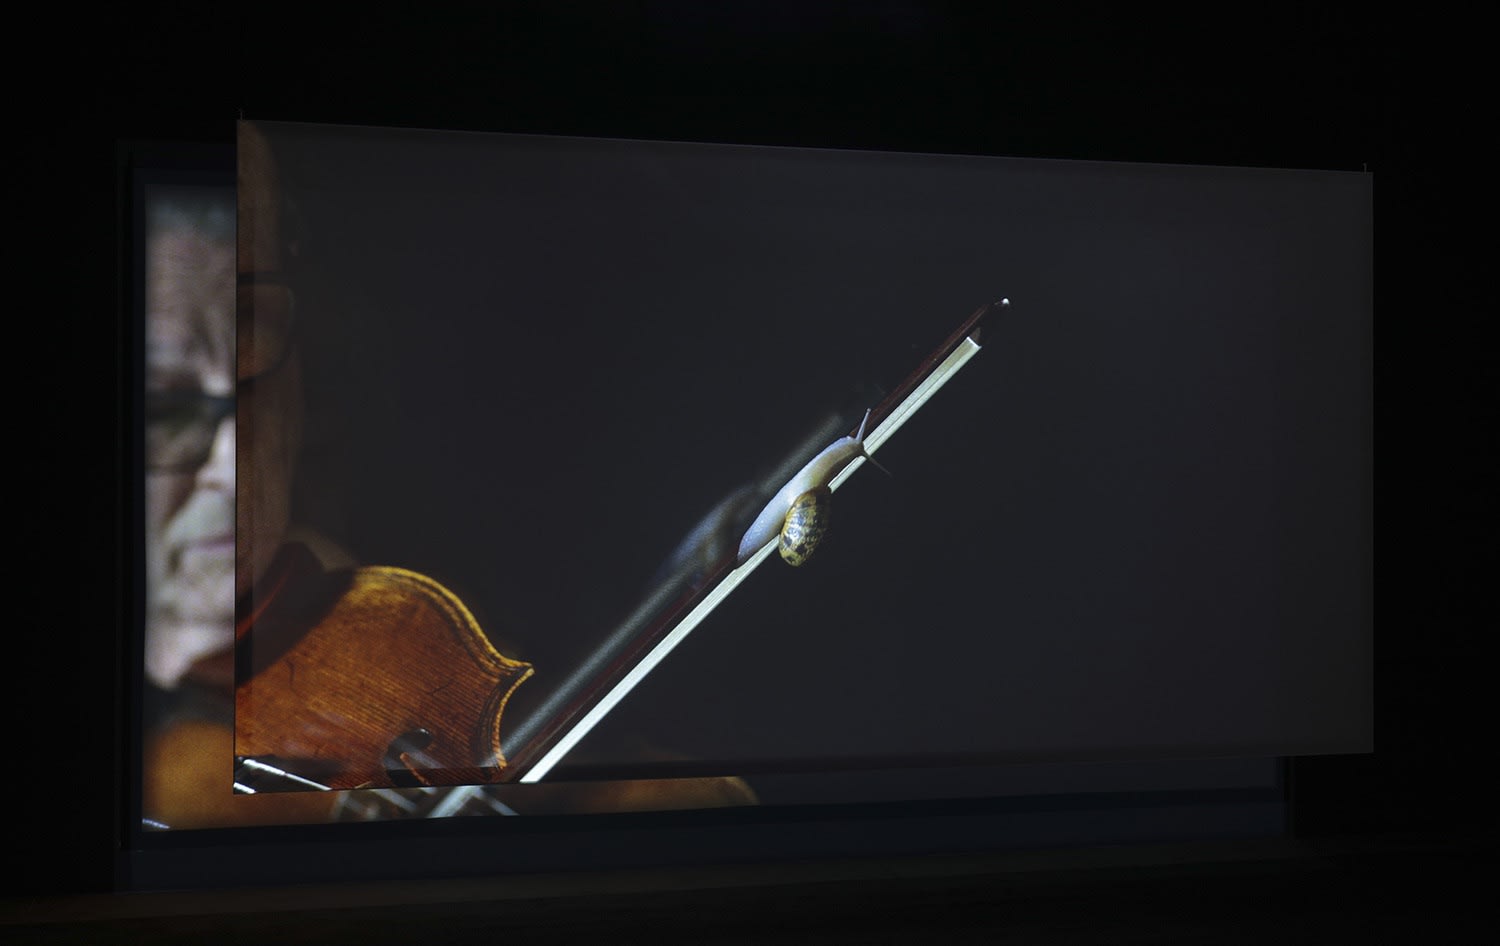 Image of a snail on a violin projected onto a screen in a darkened room.